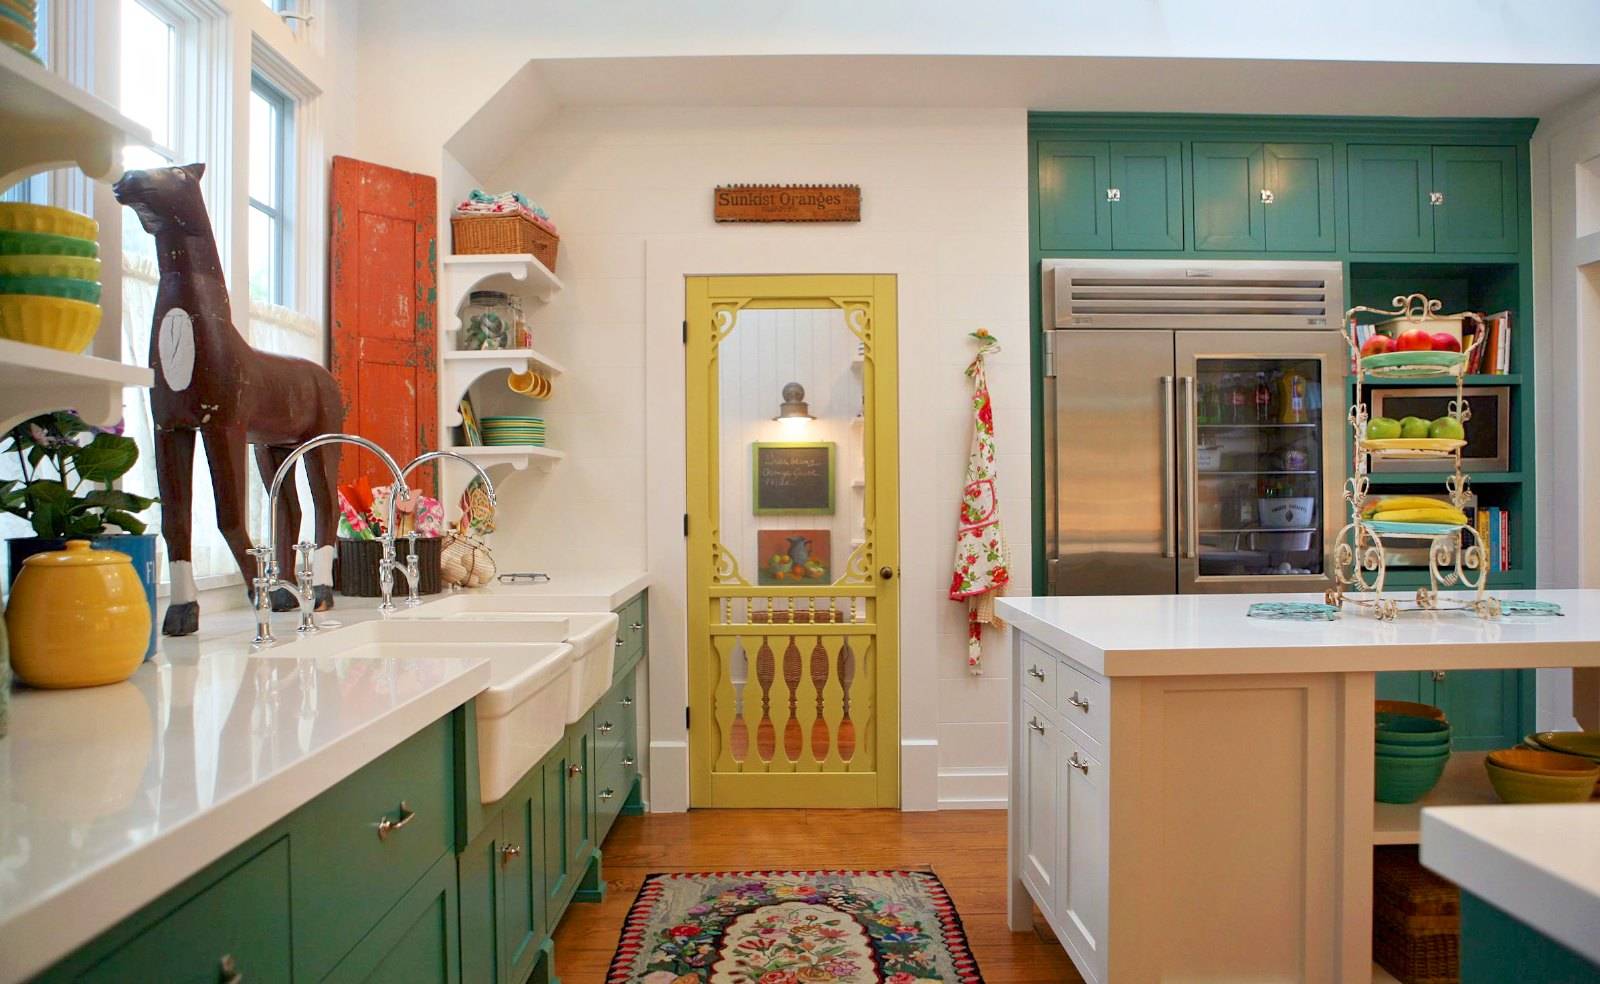 Traditional Farmhouse Kitchen With Green Cabinets and Artwork